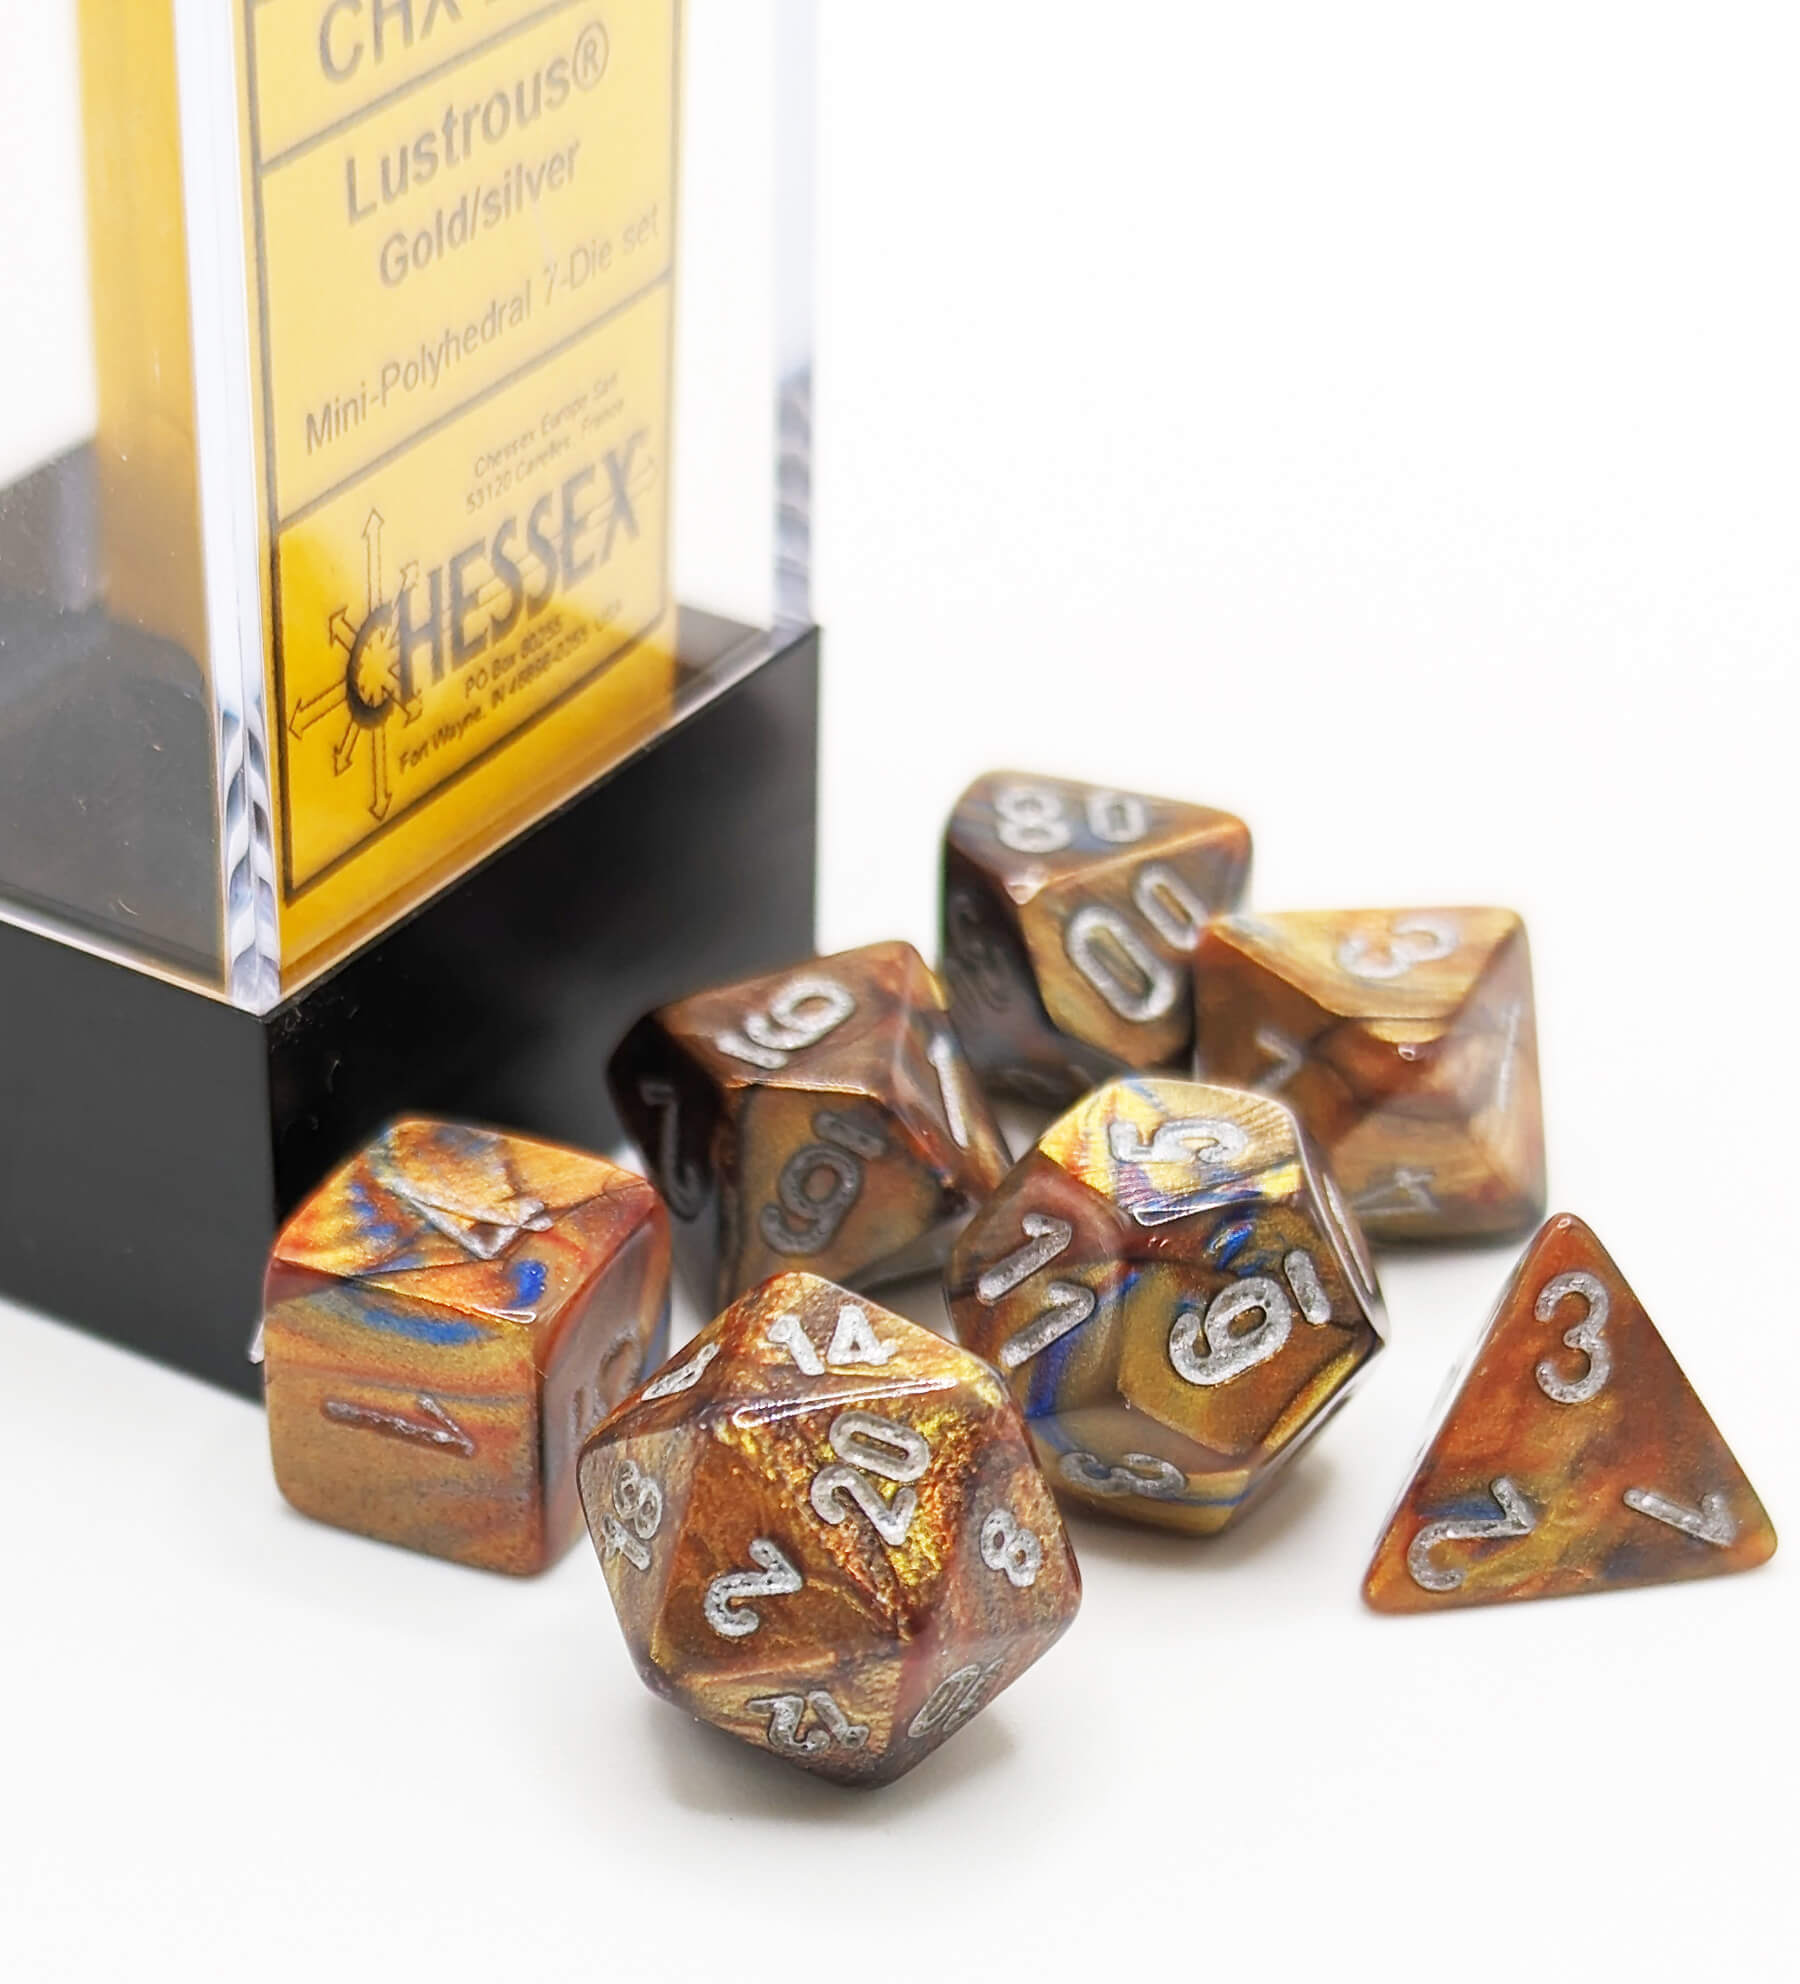 Chessex Mini Dice Series 2 (Lustrous Gold With Silver) | 10mm TTRPG Dice Set CHX20493